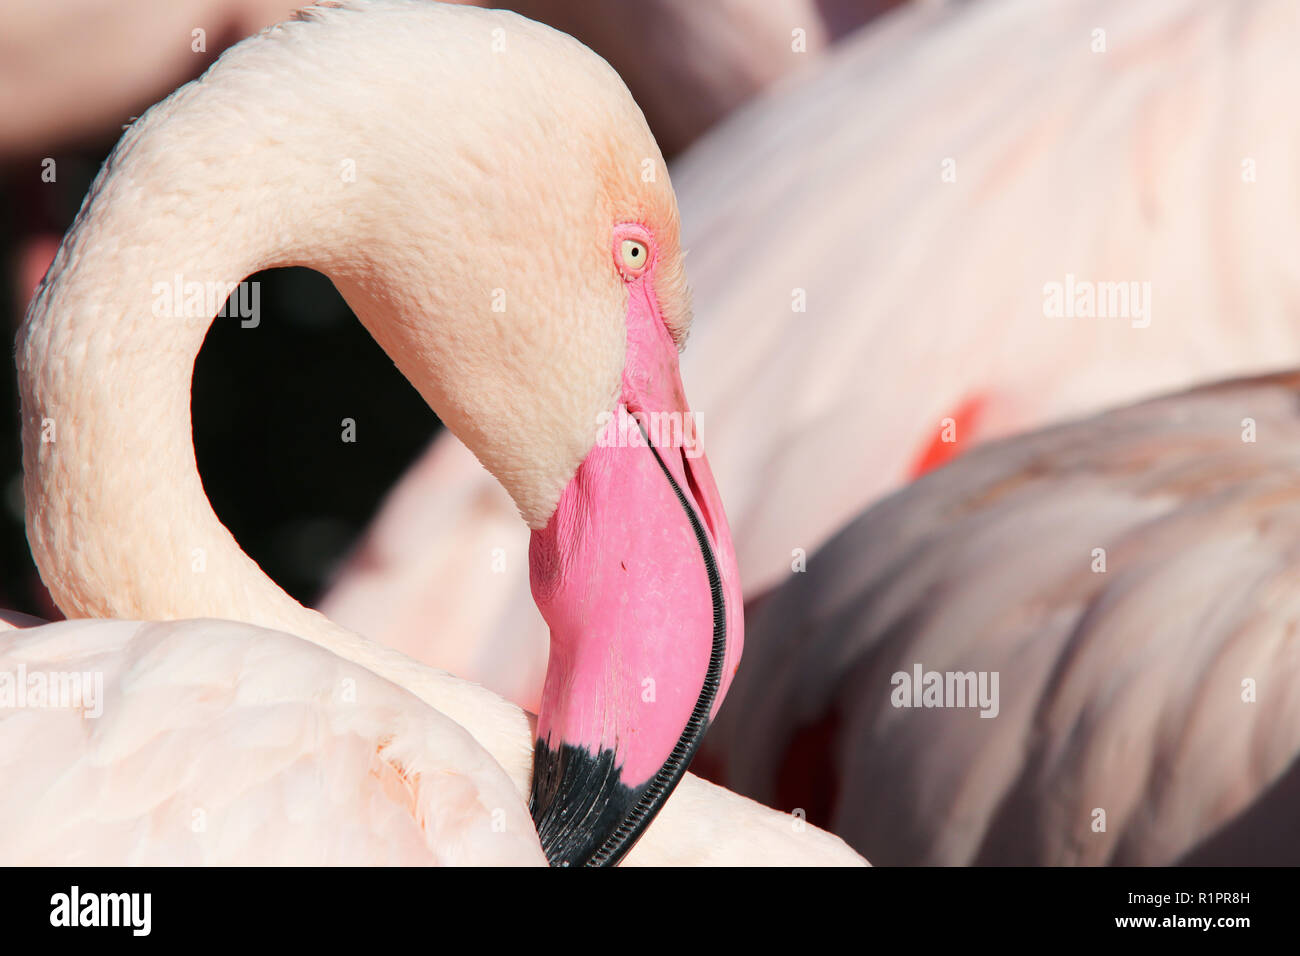 Grater flamingo - close-up of the head of grater flamingo Stock Photo